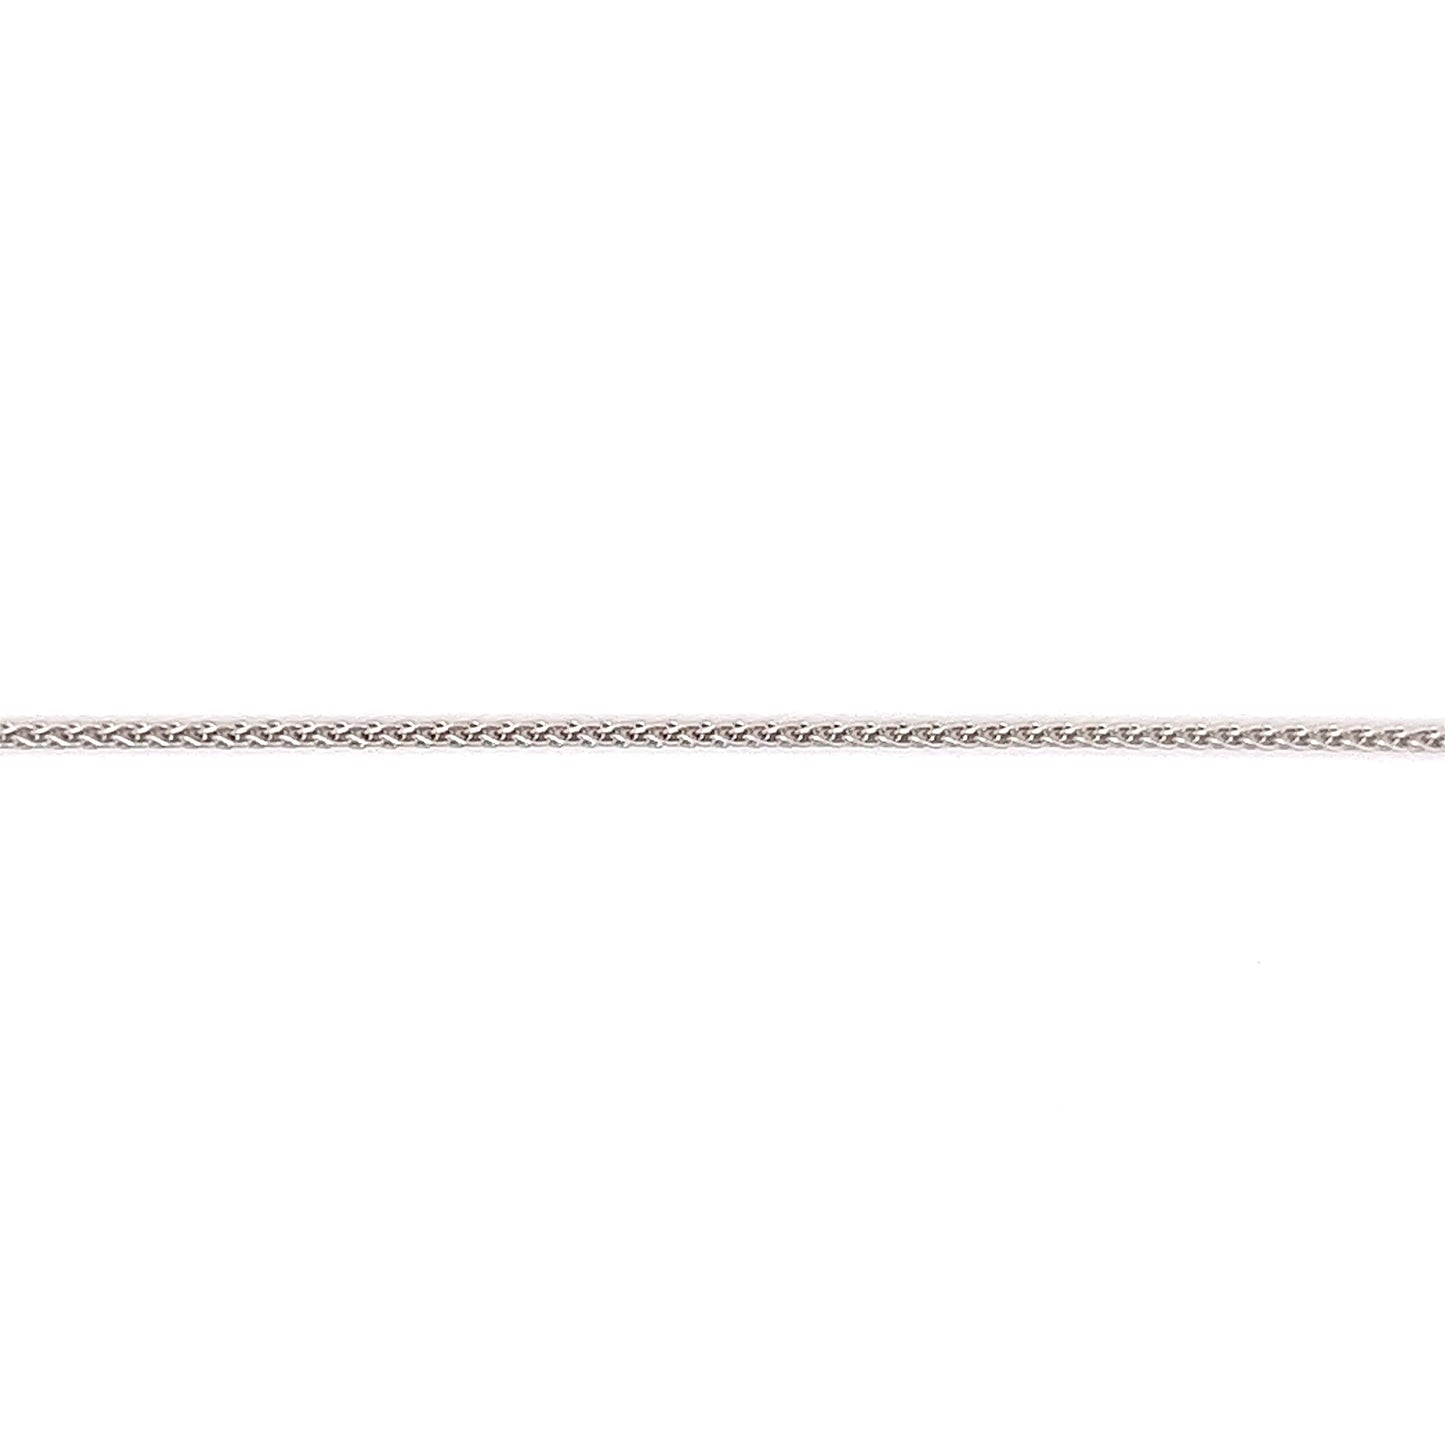 Round Wheat Chain 1.05mm with 16 Inches of Length in 10K White Gold Chain View